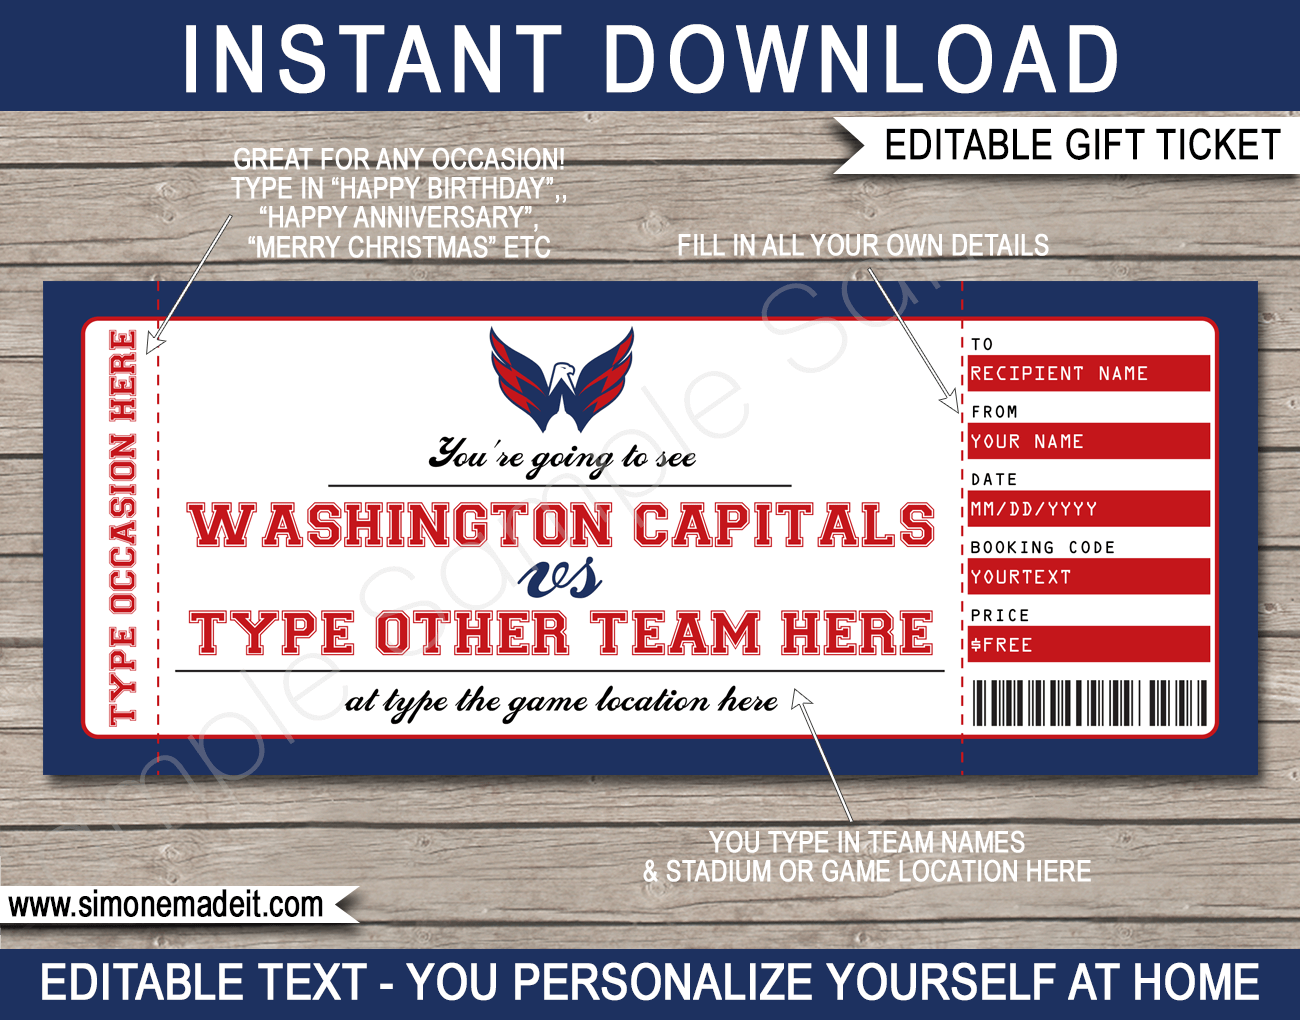 Washington Capitals kickoff playoff season: how to get tickets, giveaways,  what we know